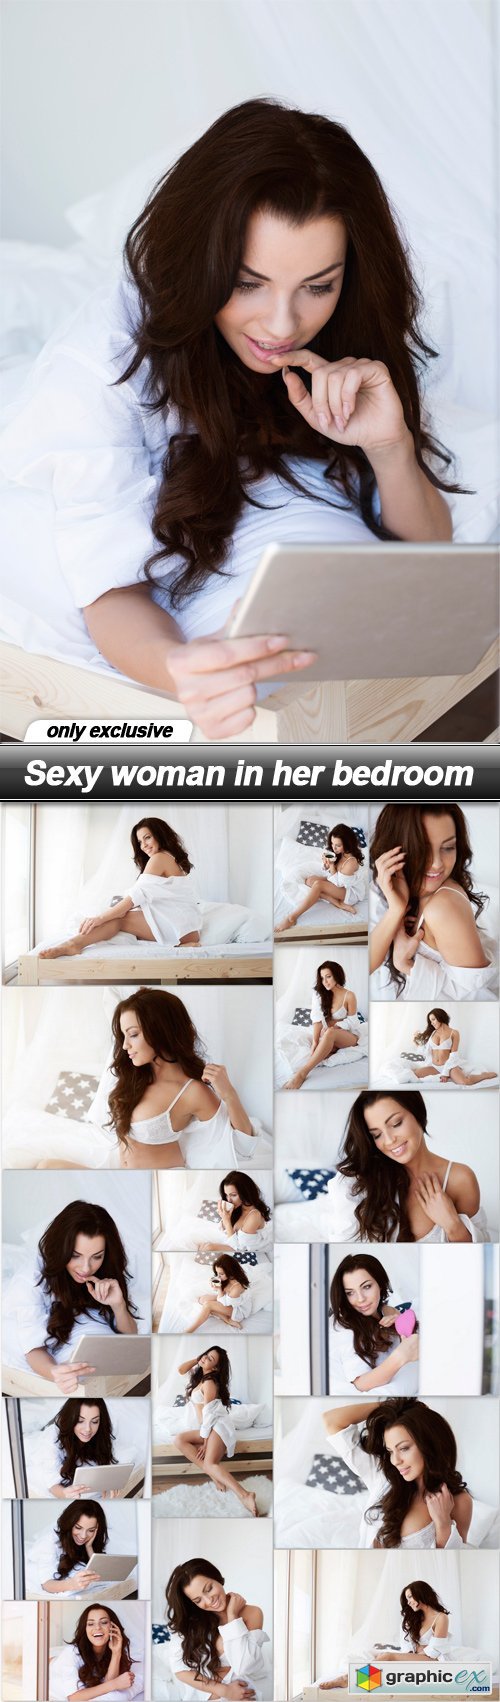 Sexy woman in her bedroom - 18 UHQ JPEG